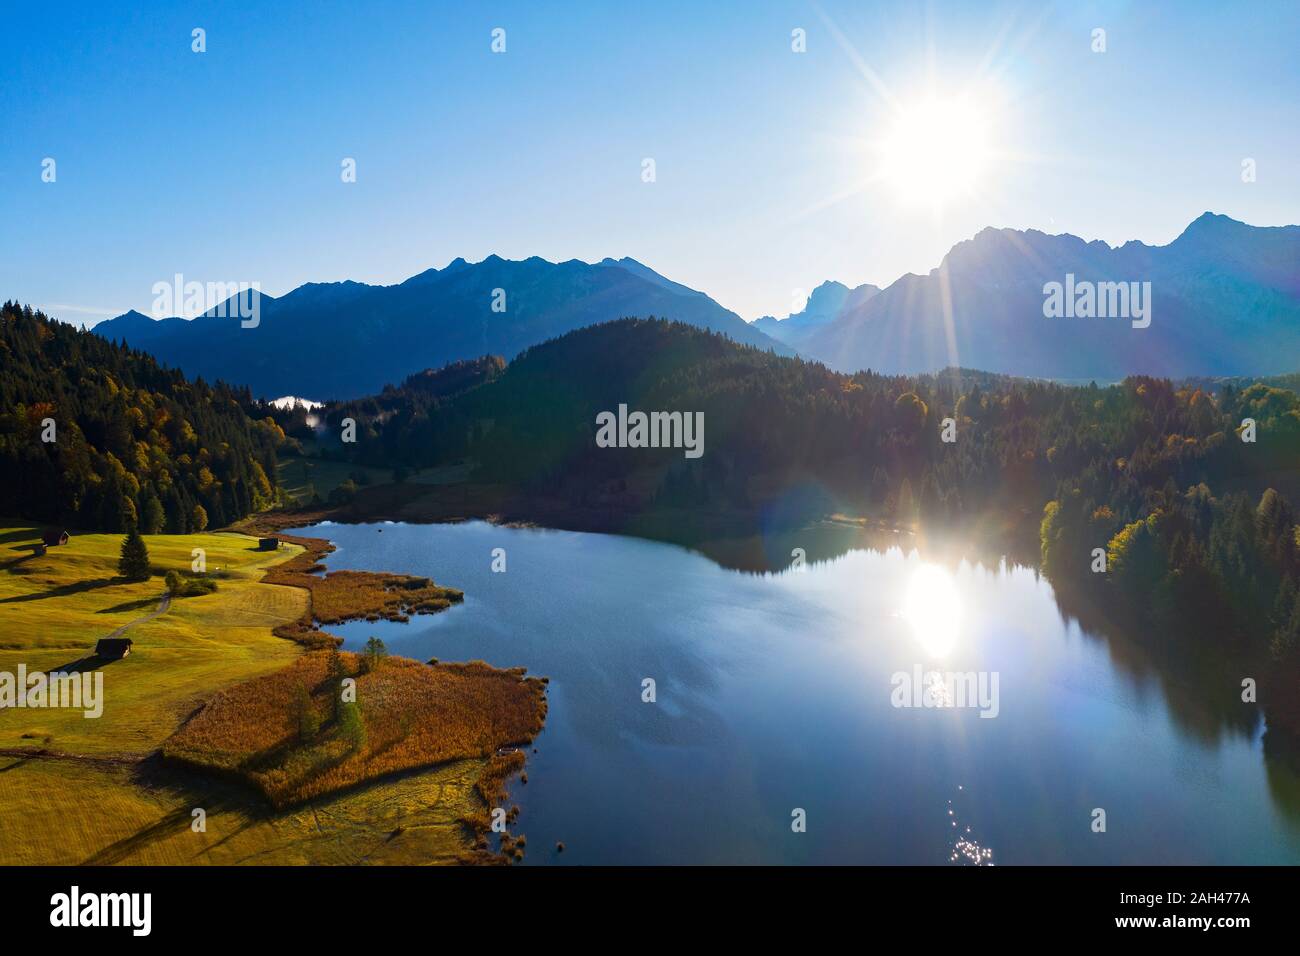 Germany, Upper Bavaria, Werdenfelser Land, Krun, Aerial view of Geroldsee on sunny day Stock Photo